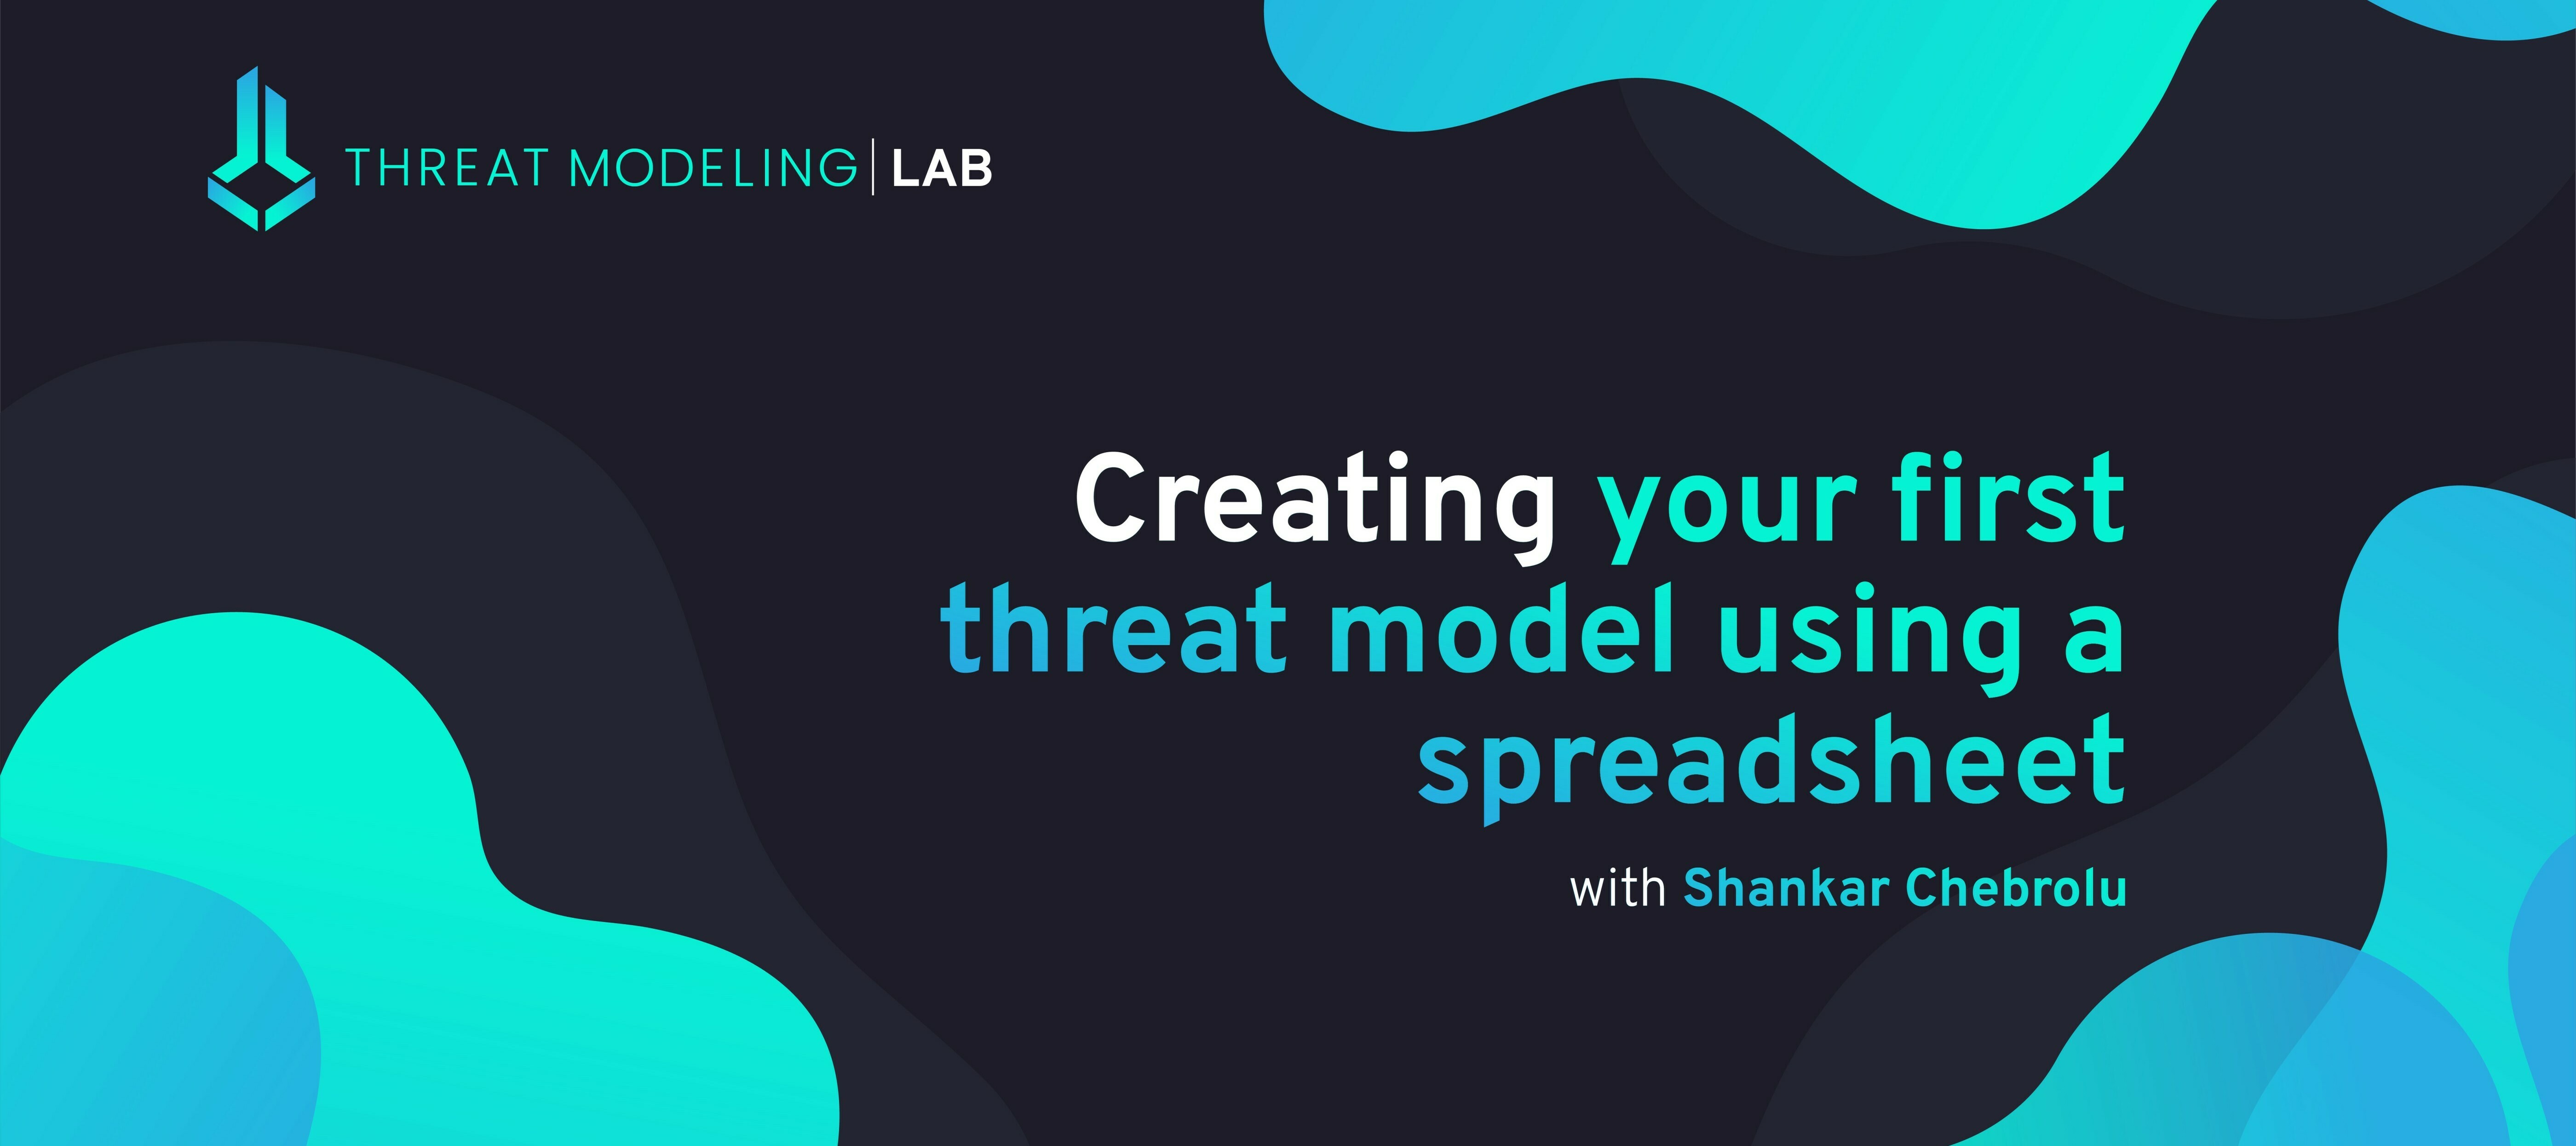 Create Your First Threat Model Using a Spreadsheet (Template, Recording, Deck Included)